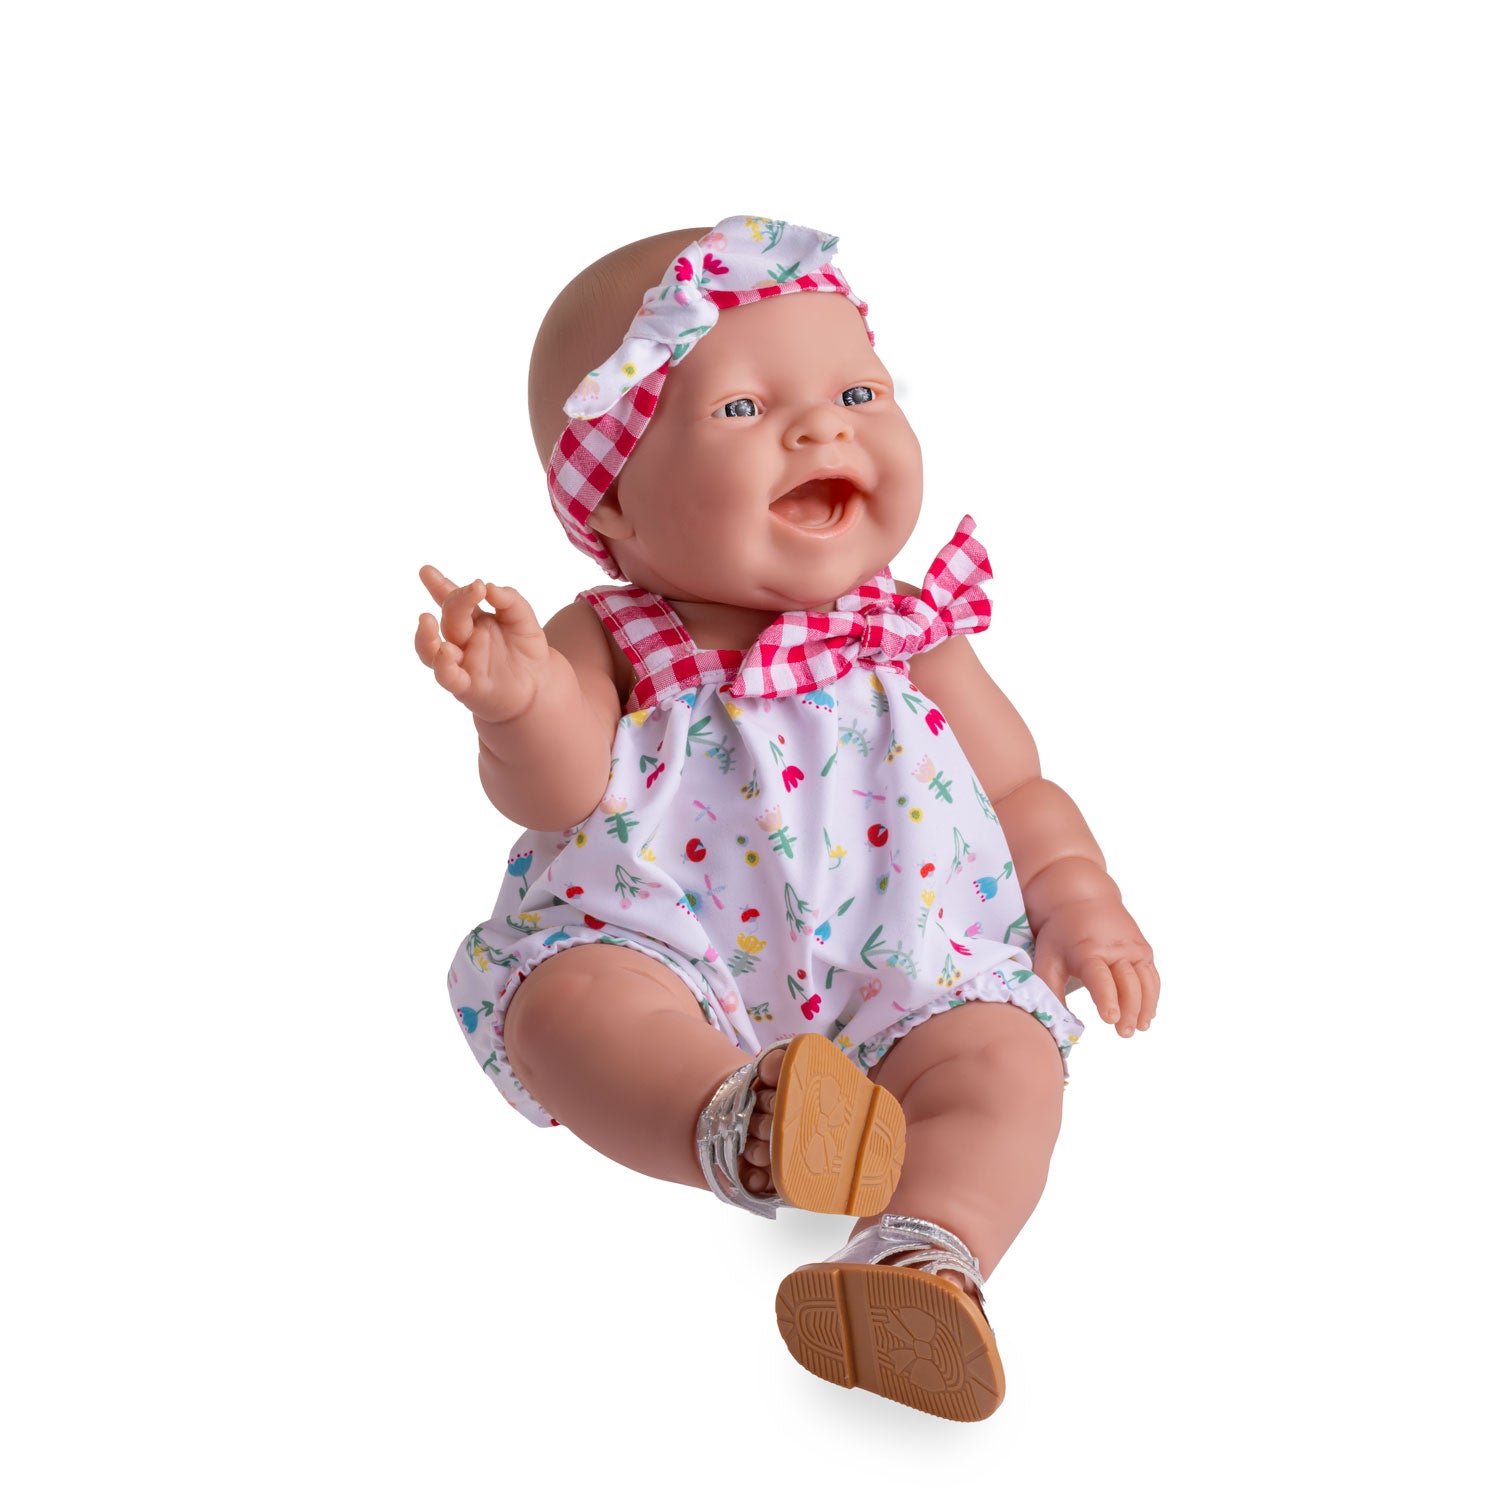 Lola Spring Picnic 14” Realistic All Vinyl Posable Play Doll – Happy Face- Dressed in 2 Piece Fun Collection Outfit with Shoes -By Berenguer Boutique